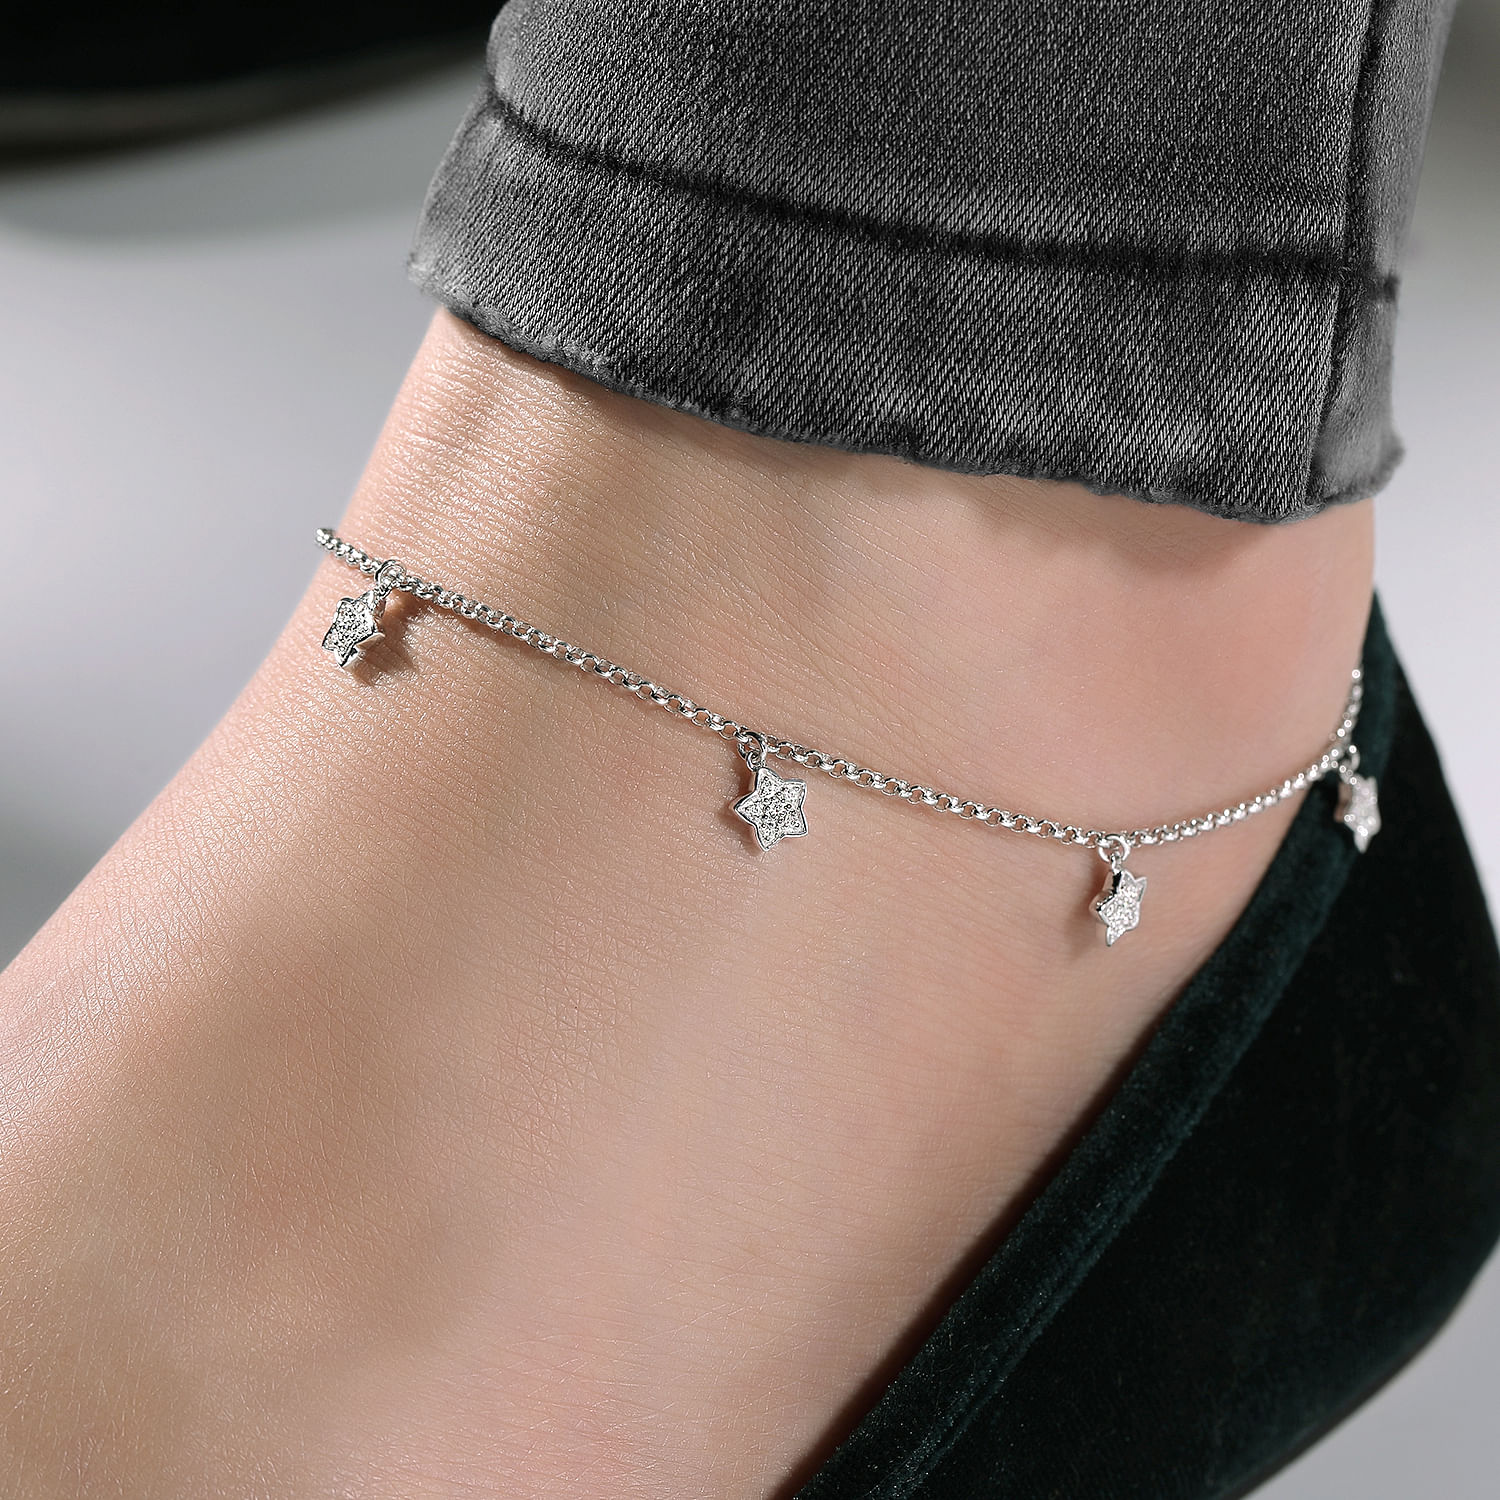 14K White Gold Chain Ankle Bracelet with White Gold Diamond Star Charms